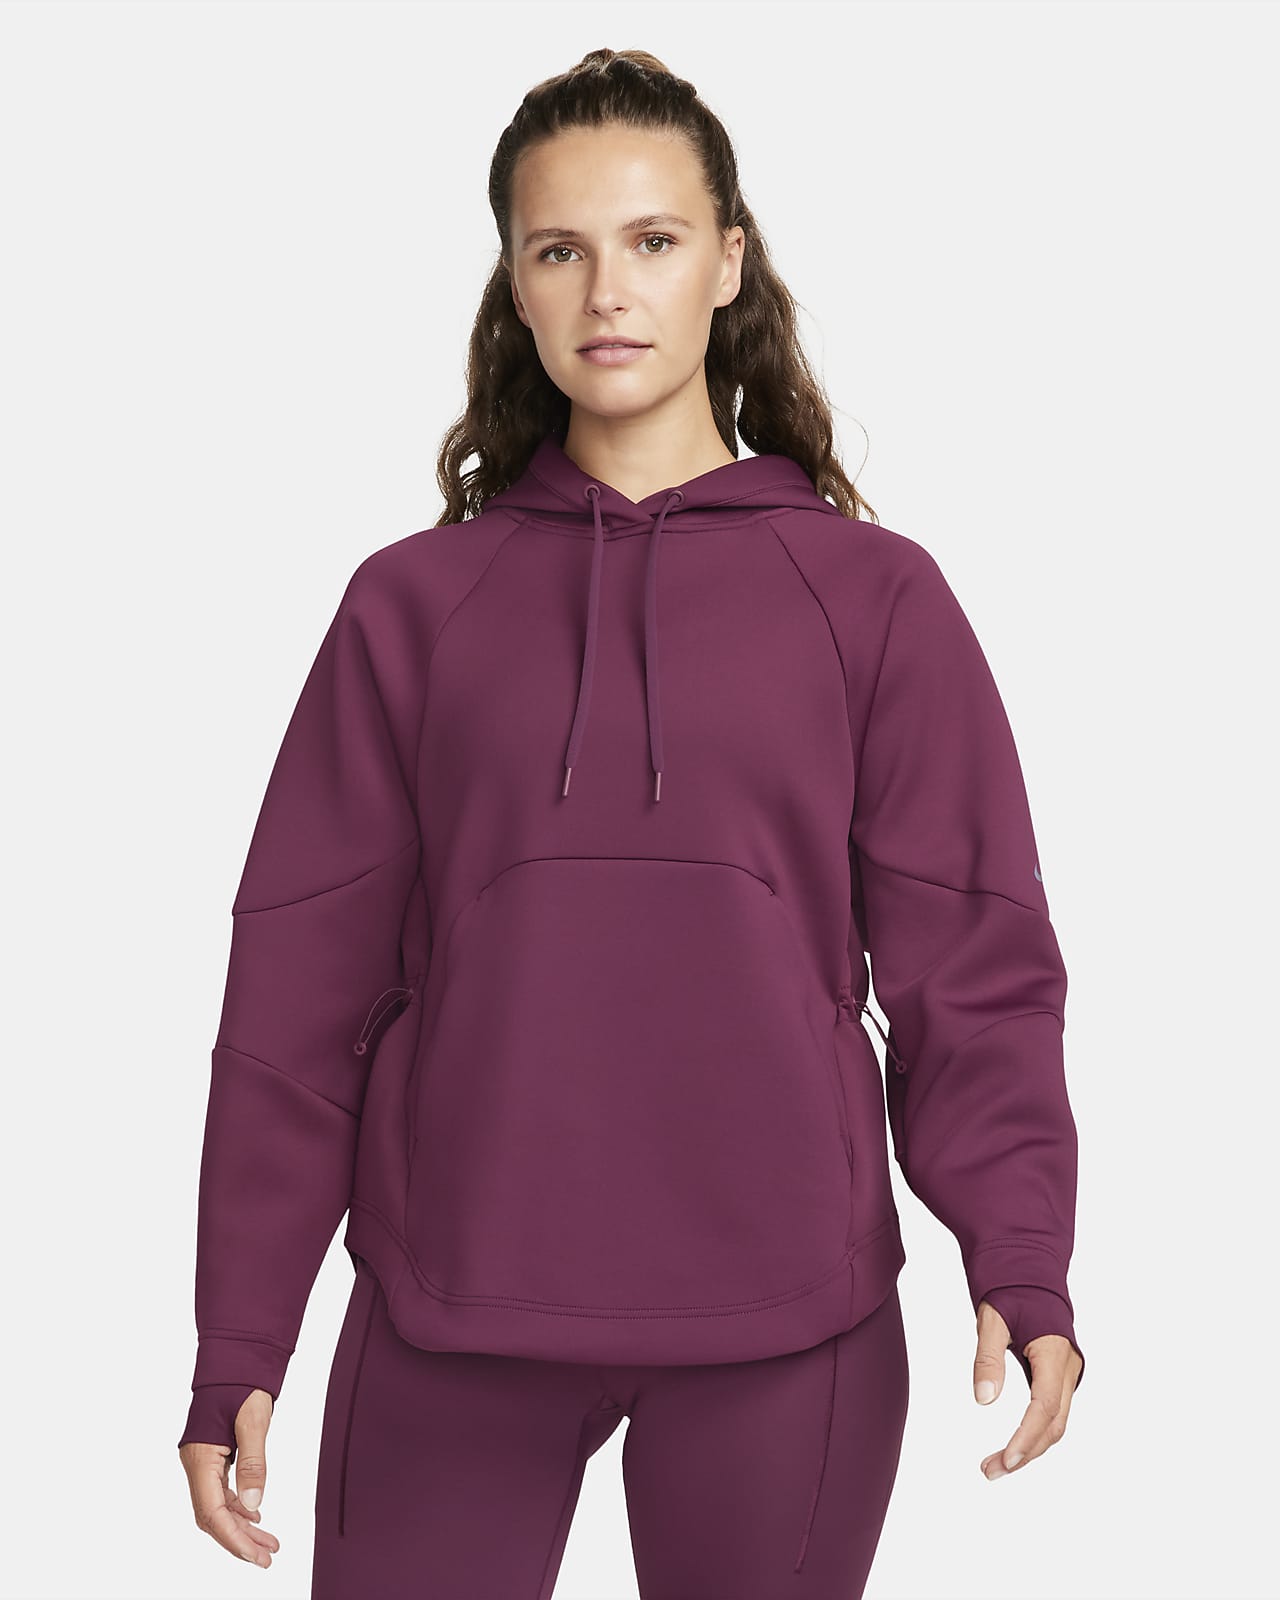 https://static.nike.com/a/images/t_PDP_1280_v1/f_auto,q_auto:eco/8ac1292c-4032-41c9-b7ae-936e4d50ee1f/dri-fit-prima-womens-pullover-training-hoodie-c6C36L.png